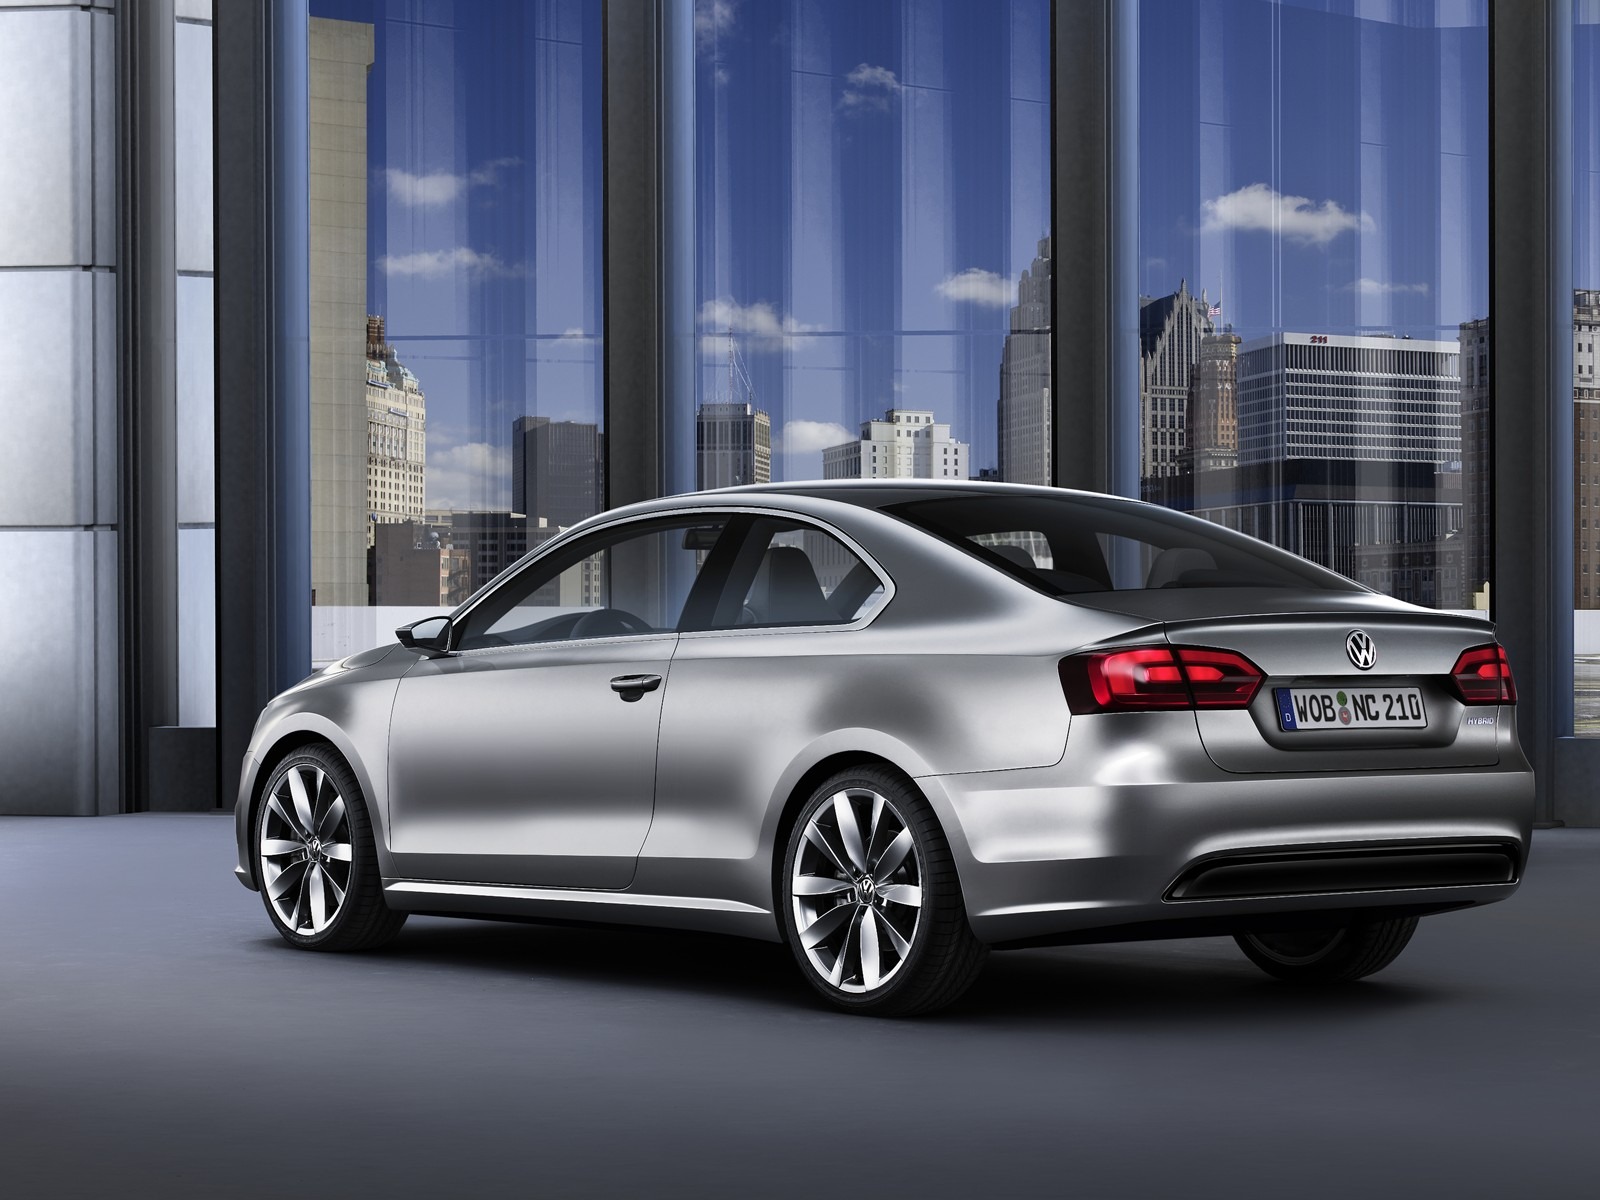 Volkswagen Concept Car tapety (2) #1 - 1600x1200